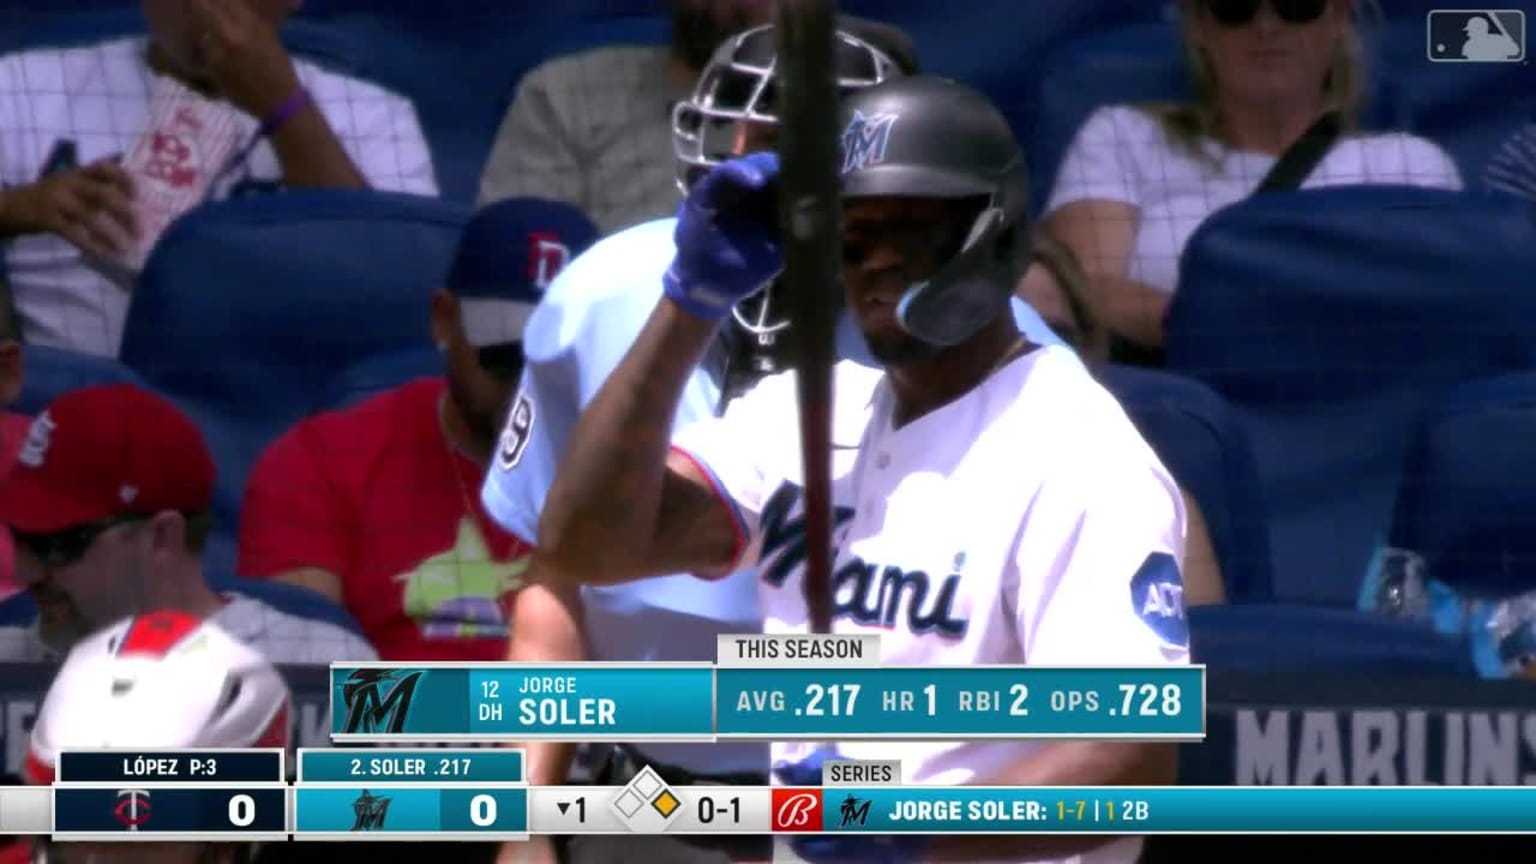 Jorge Soler is a home run monster, hits two more dingers